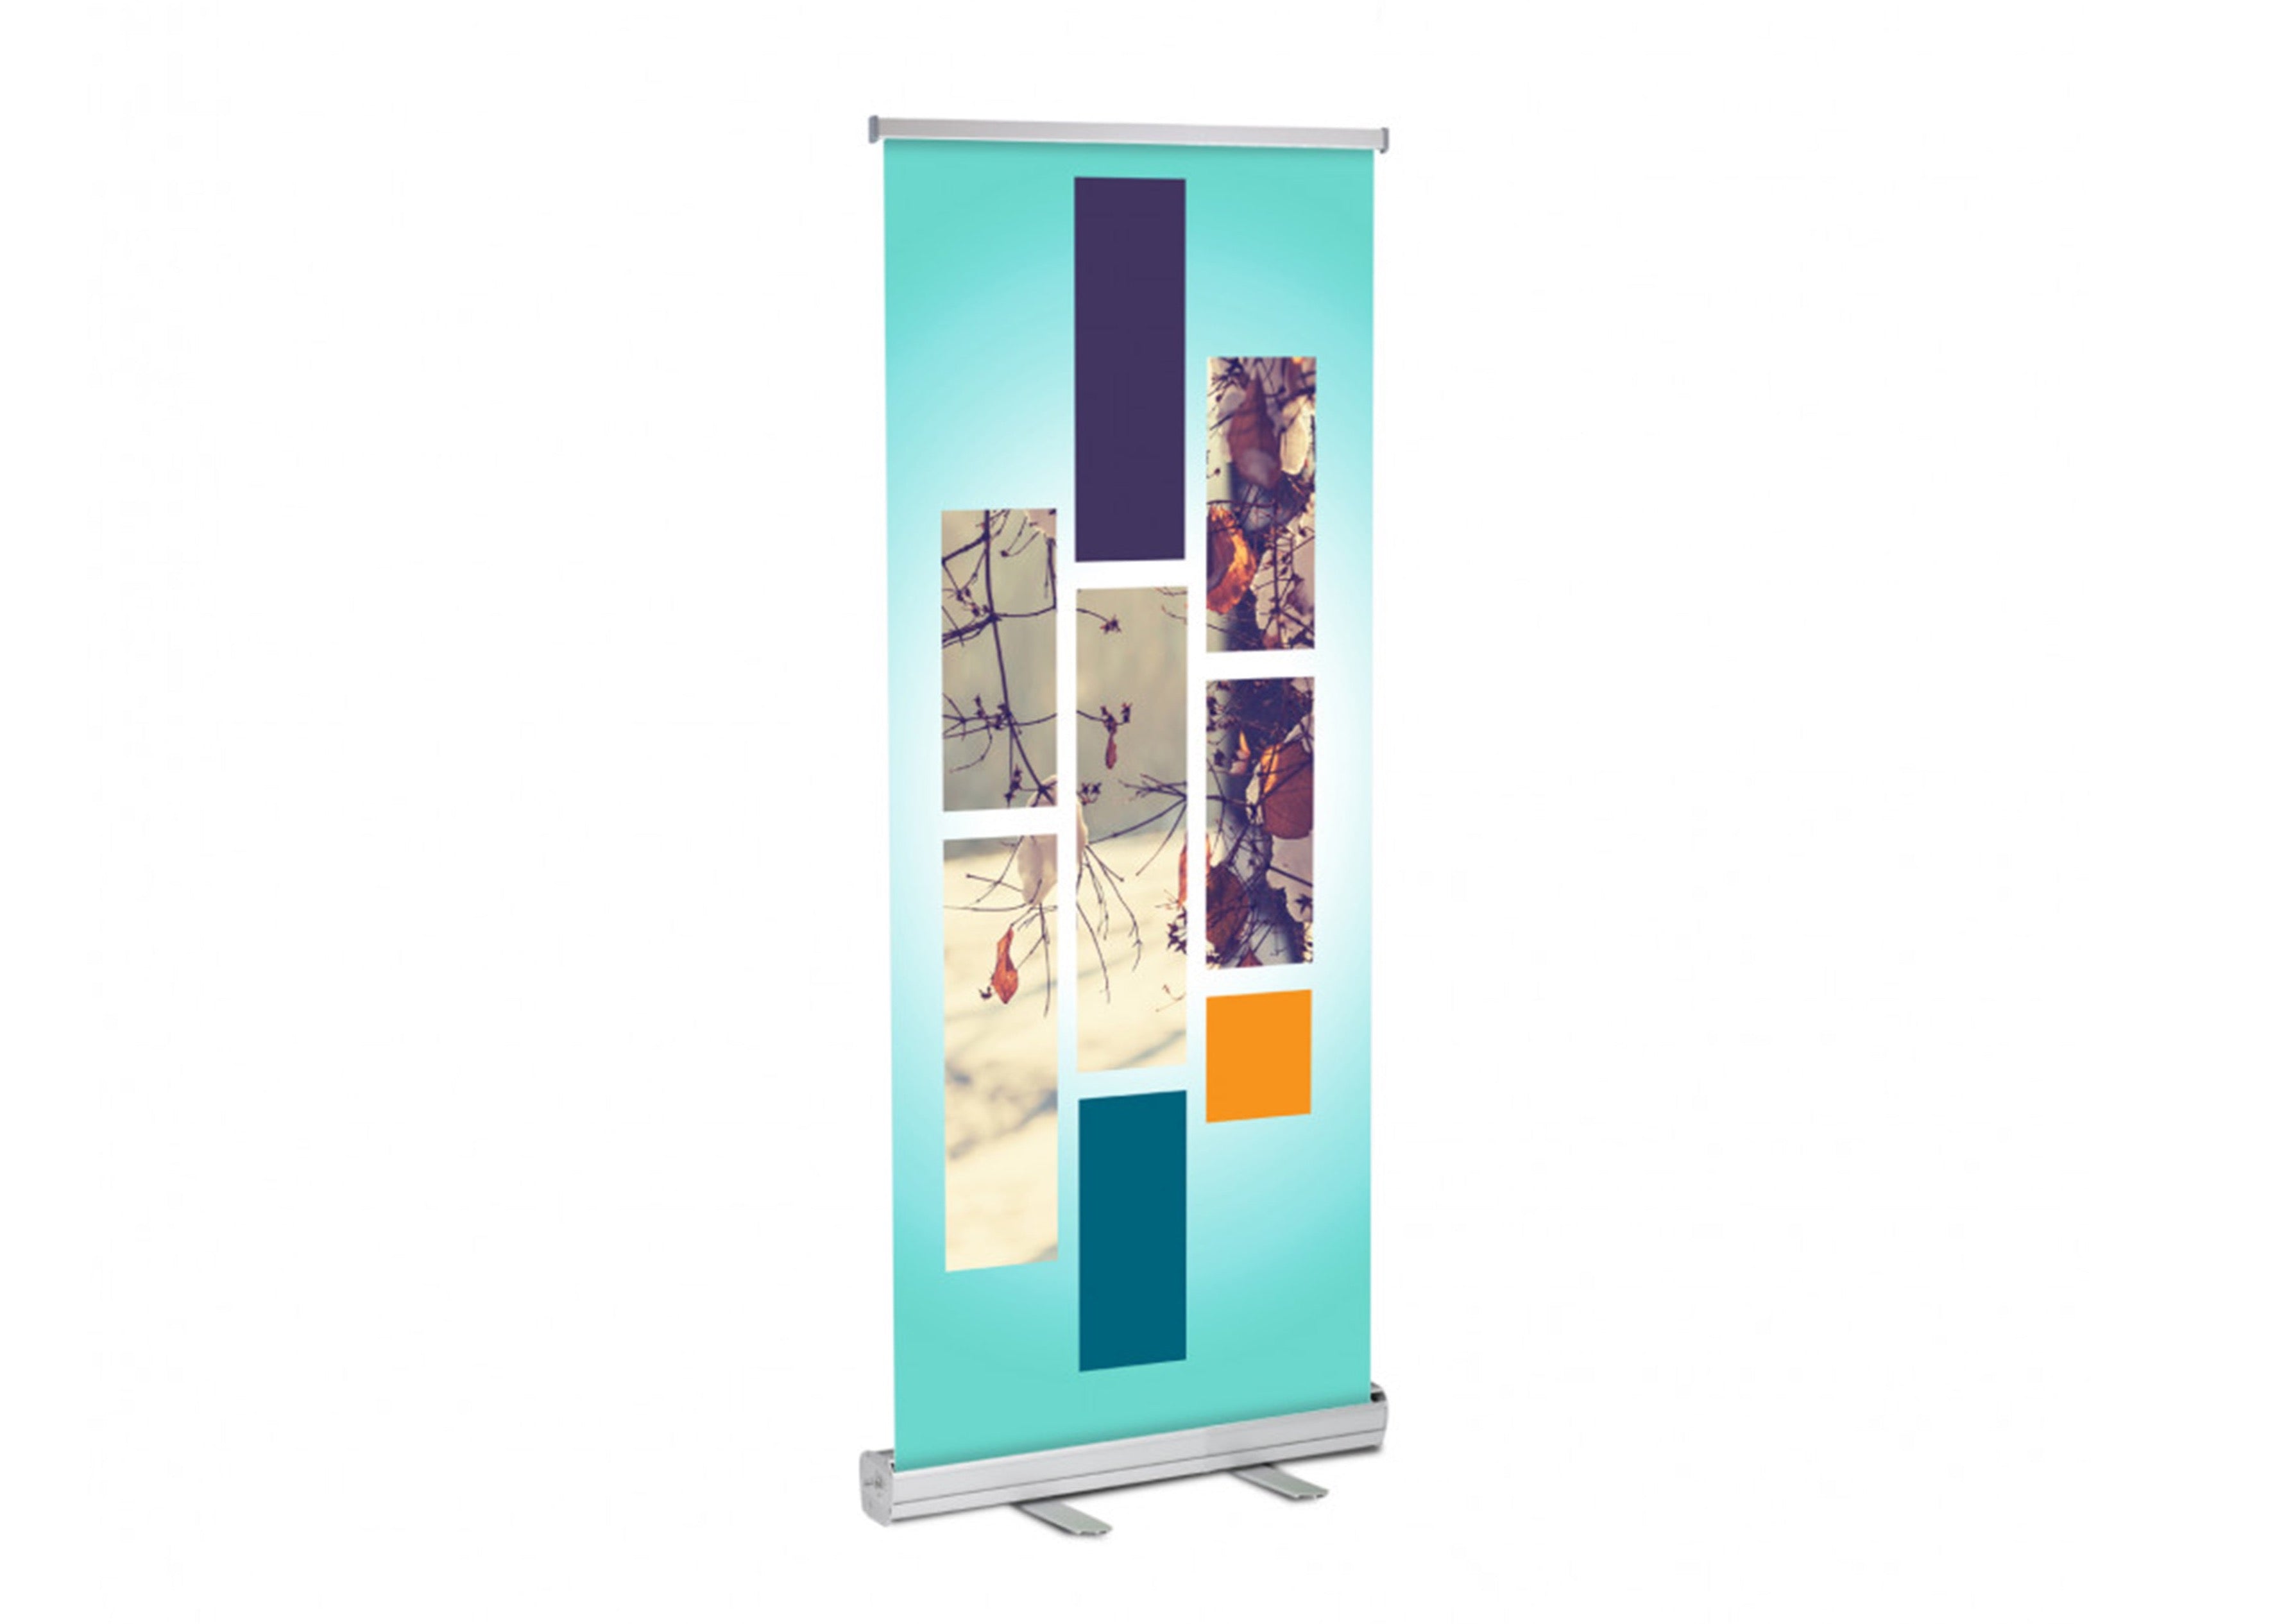 Standard Retractable Banner Stand